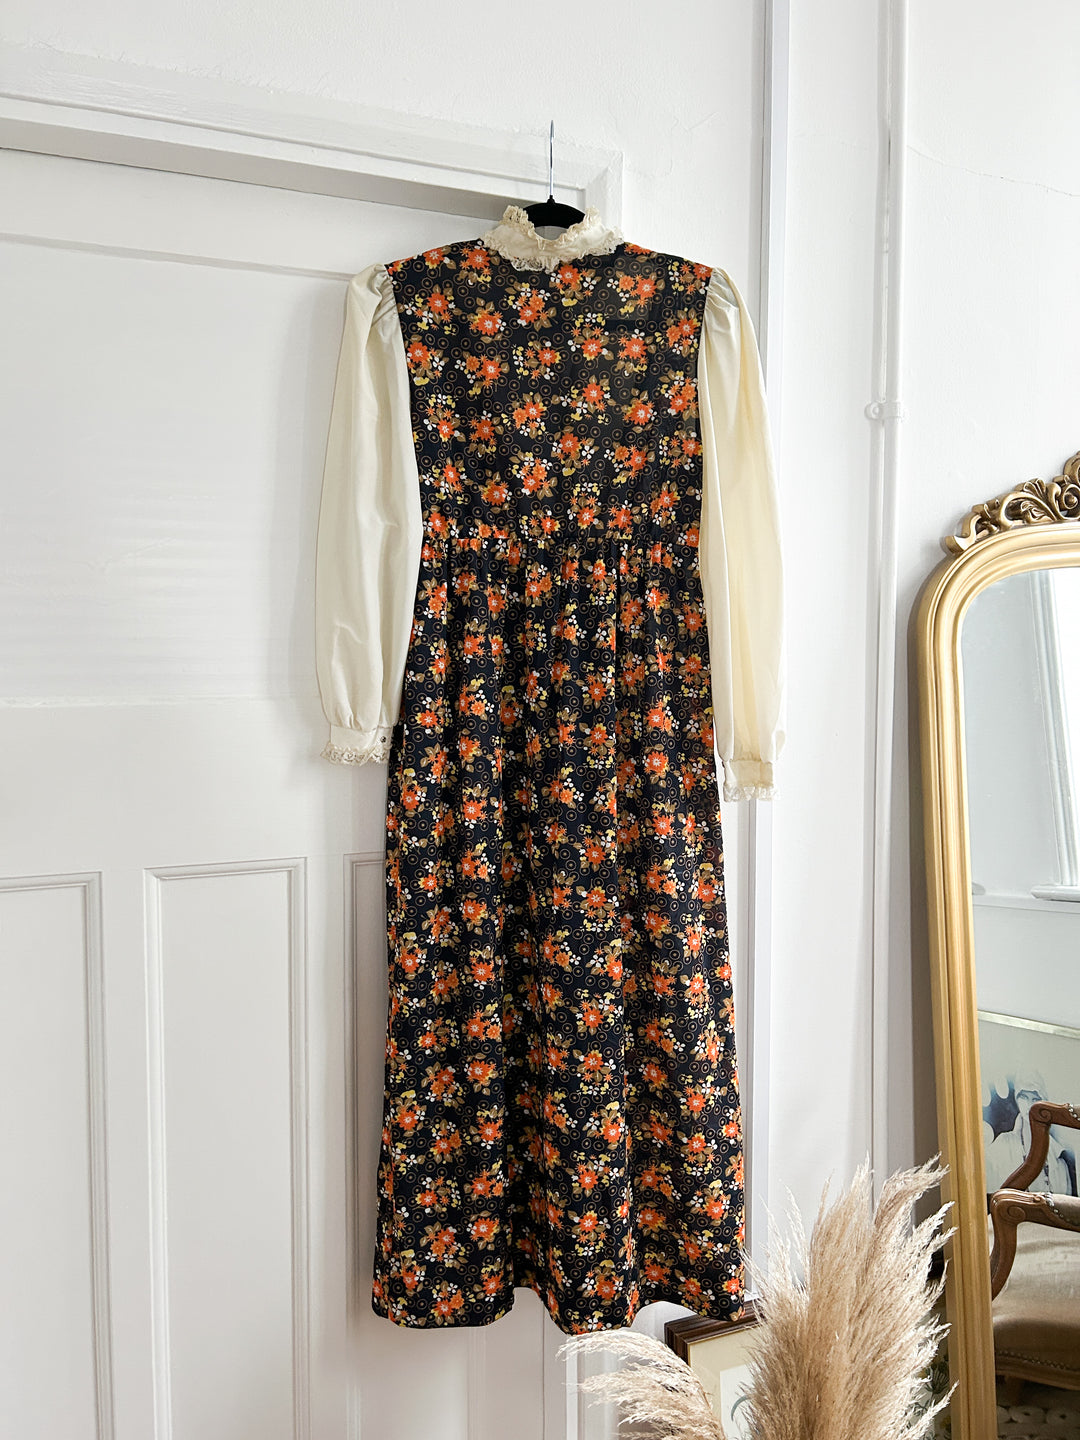 CUTE 70S FLORAL PRAIRIE DRESS APPROX UK SIZE 12